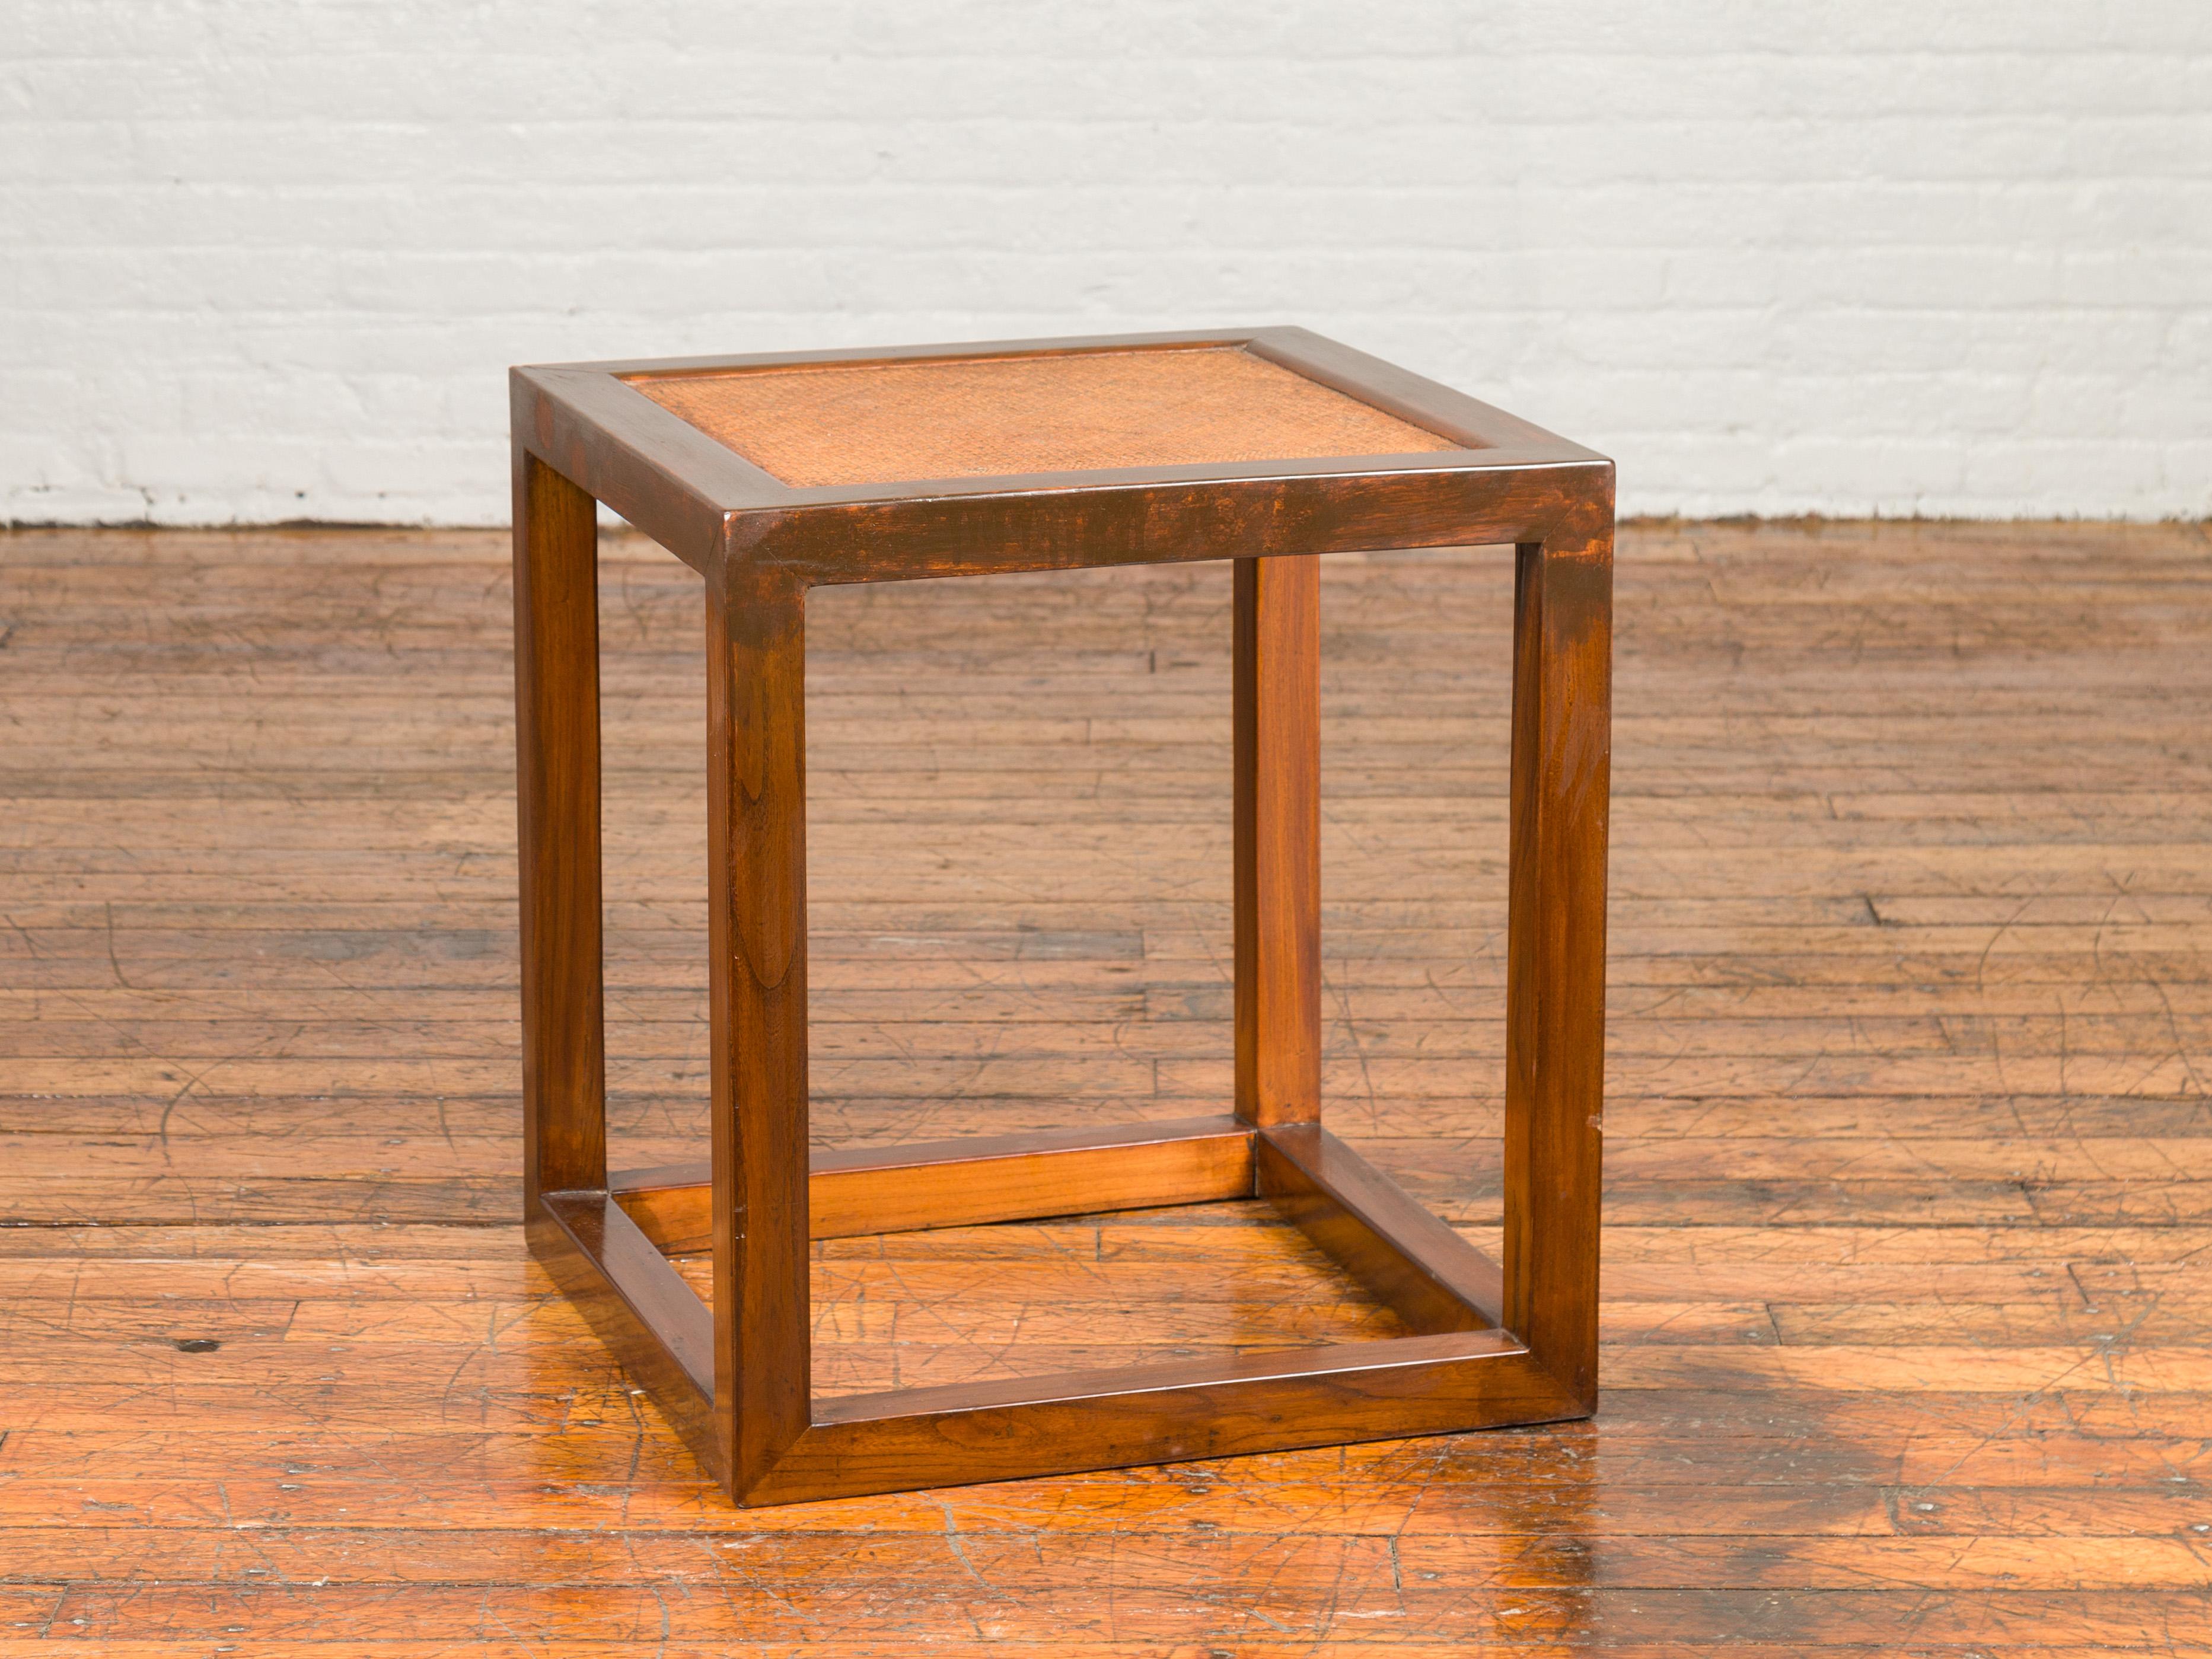 Minimalist Cubic Side Table with Rattan Top, Straight Legs and Stretchers In Good Condition For Sale In Yonkers, NY